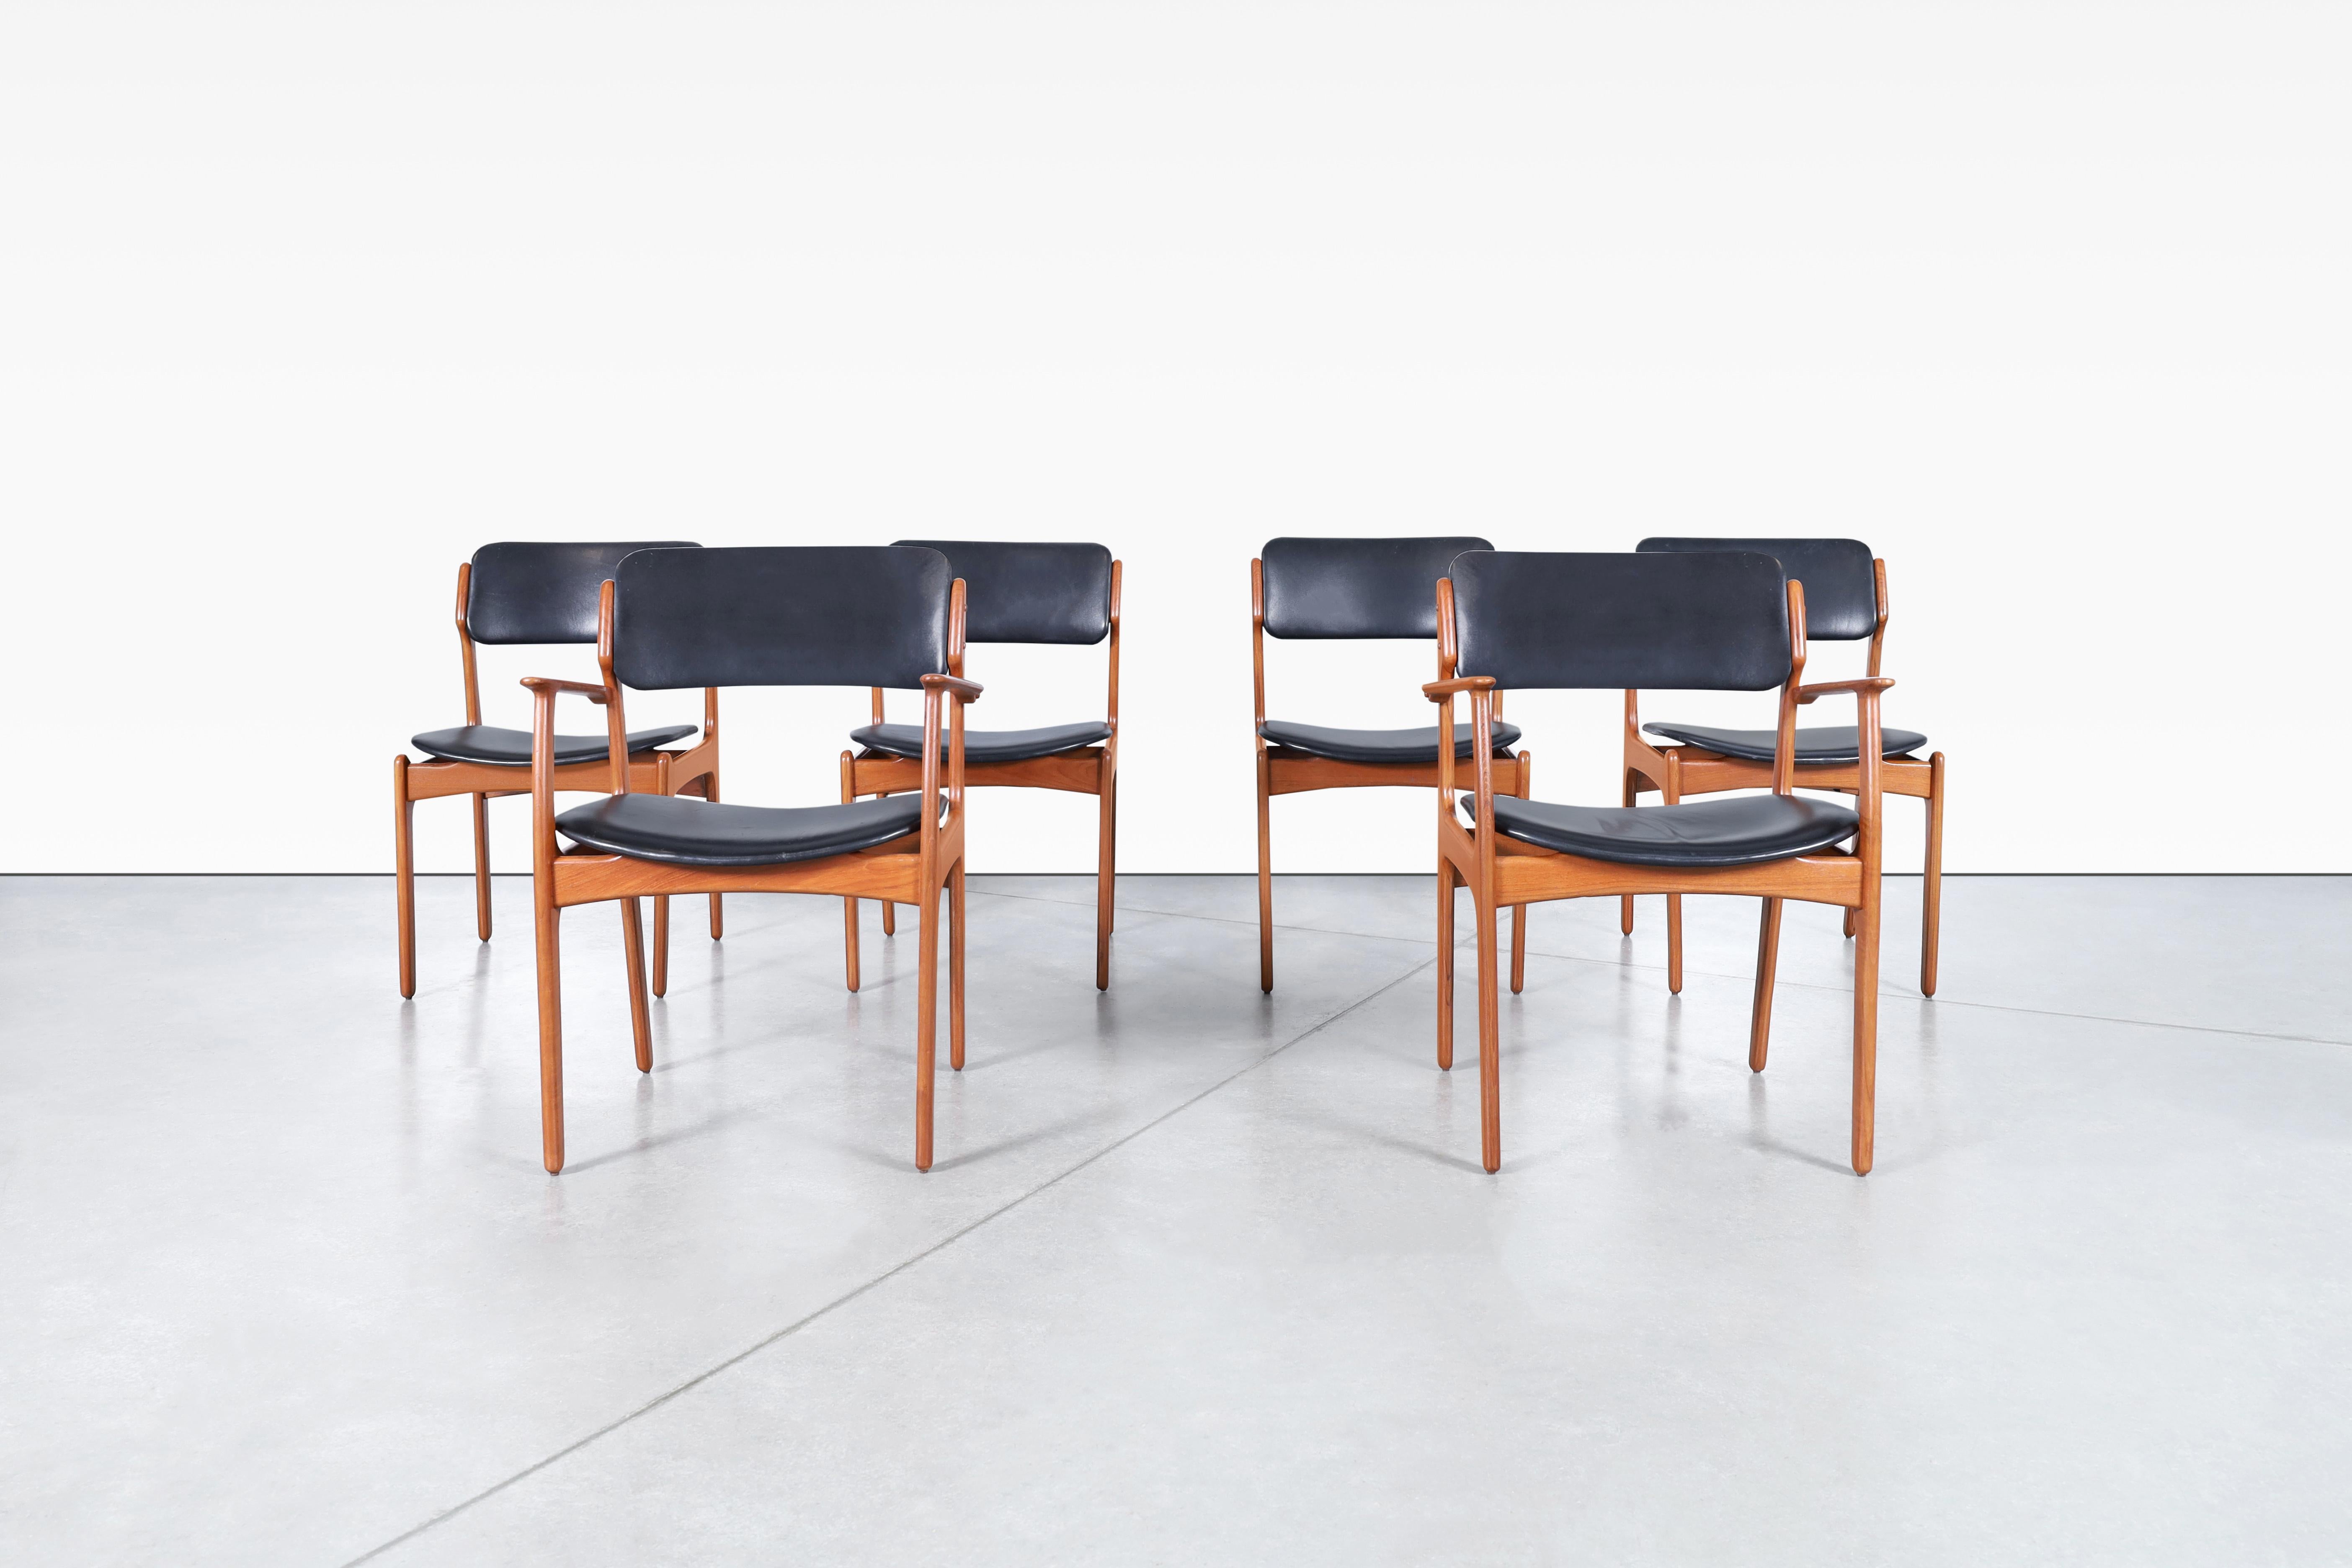 Looking to elevate your dining space with a touch of mid-century charm? Look no further than this iconic dining chairs that were designed by Erik Buch for Oddense Maskinsnedkeri in Denmark. These chairs, which are known as model OD-49 are comprised